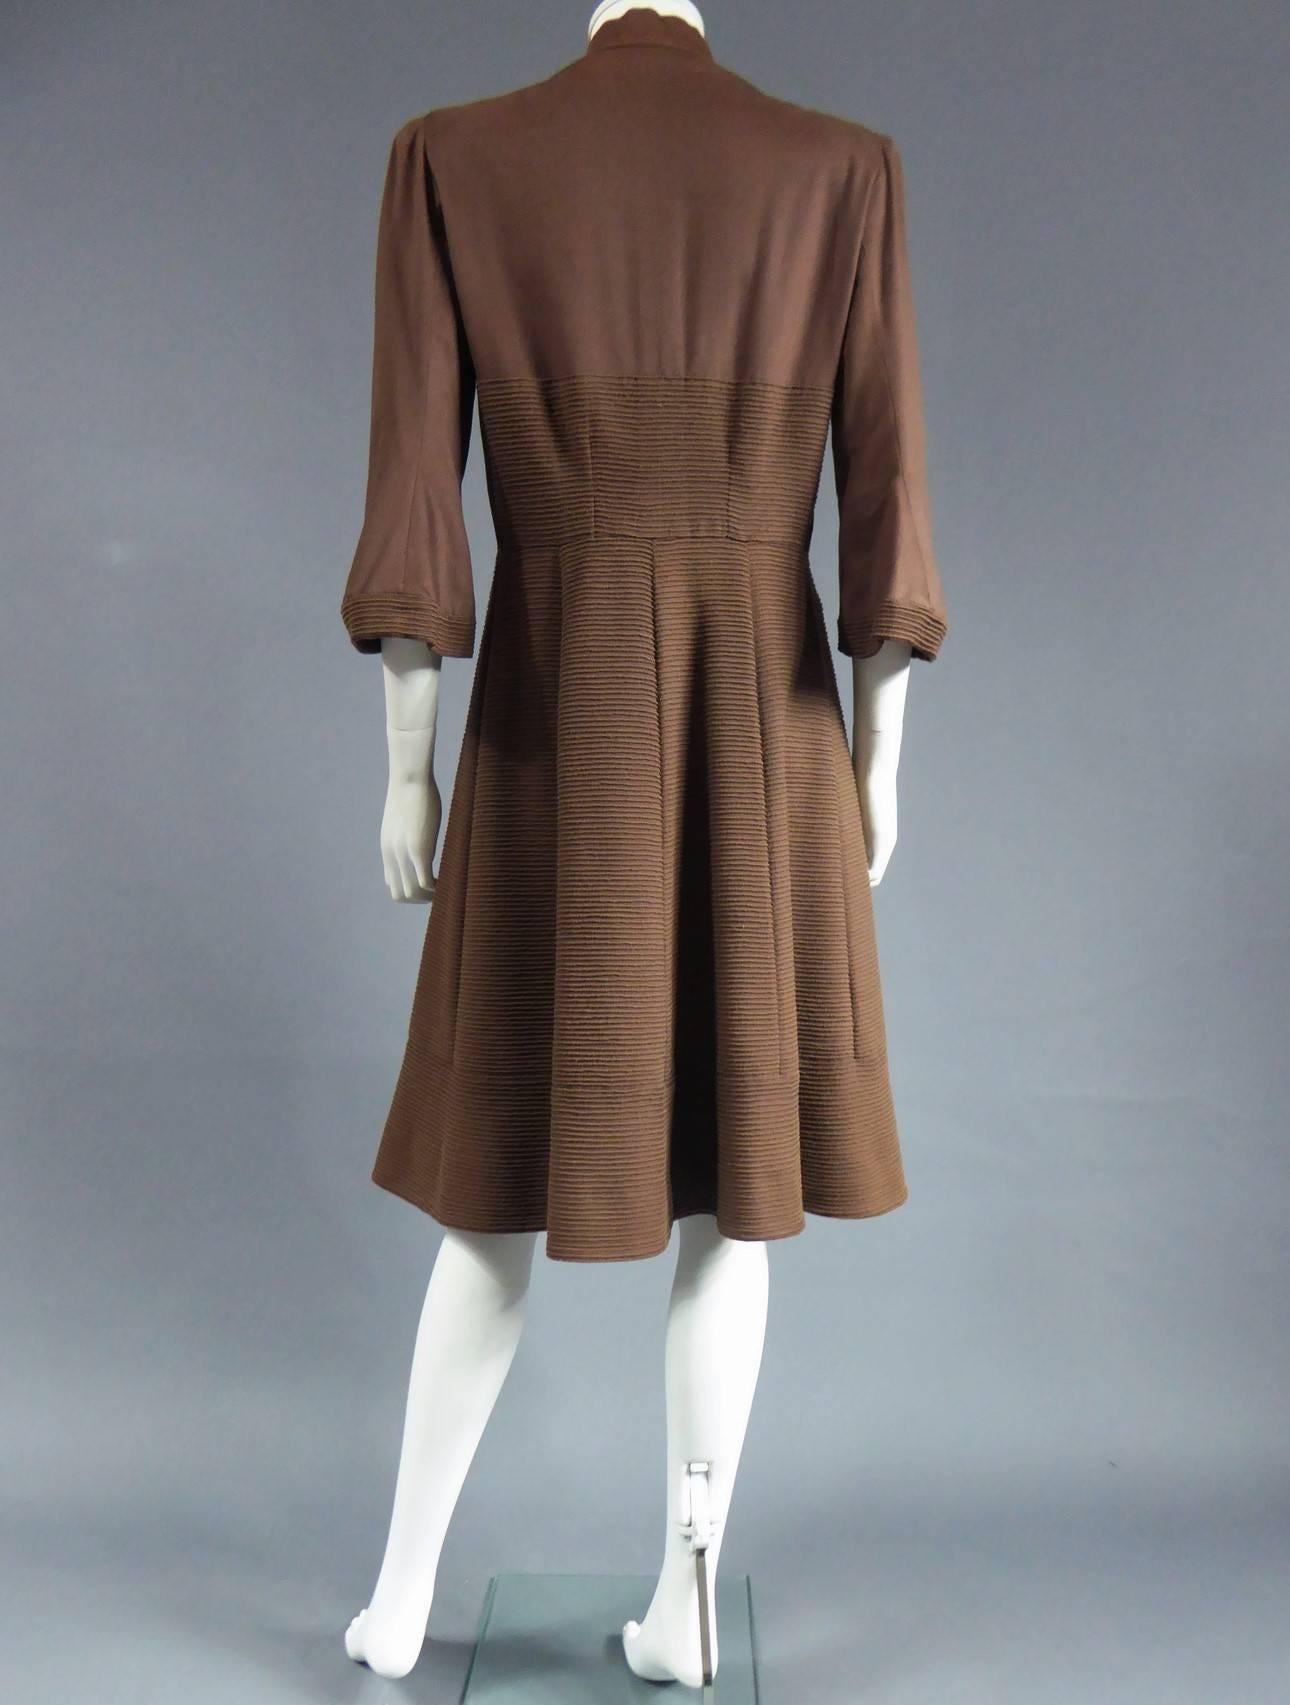 Circa 1944/1948
France Haute Couture
Interesting Haute Couture coat dress CARVEN, 6 Round Point Champs Elysee Paris, dating from the period of the Liberation of France. Very fine chamois alpaca à bourrelets with matching threads sewn in parralel